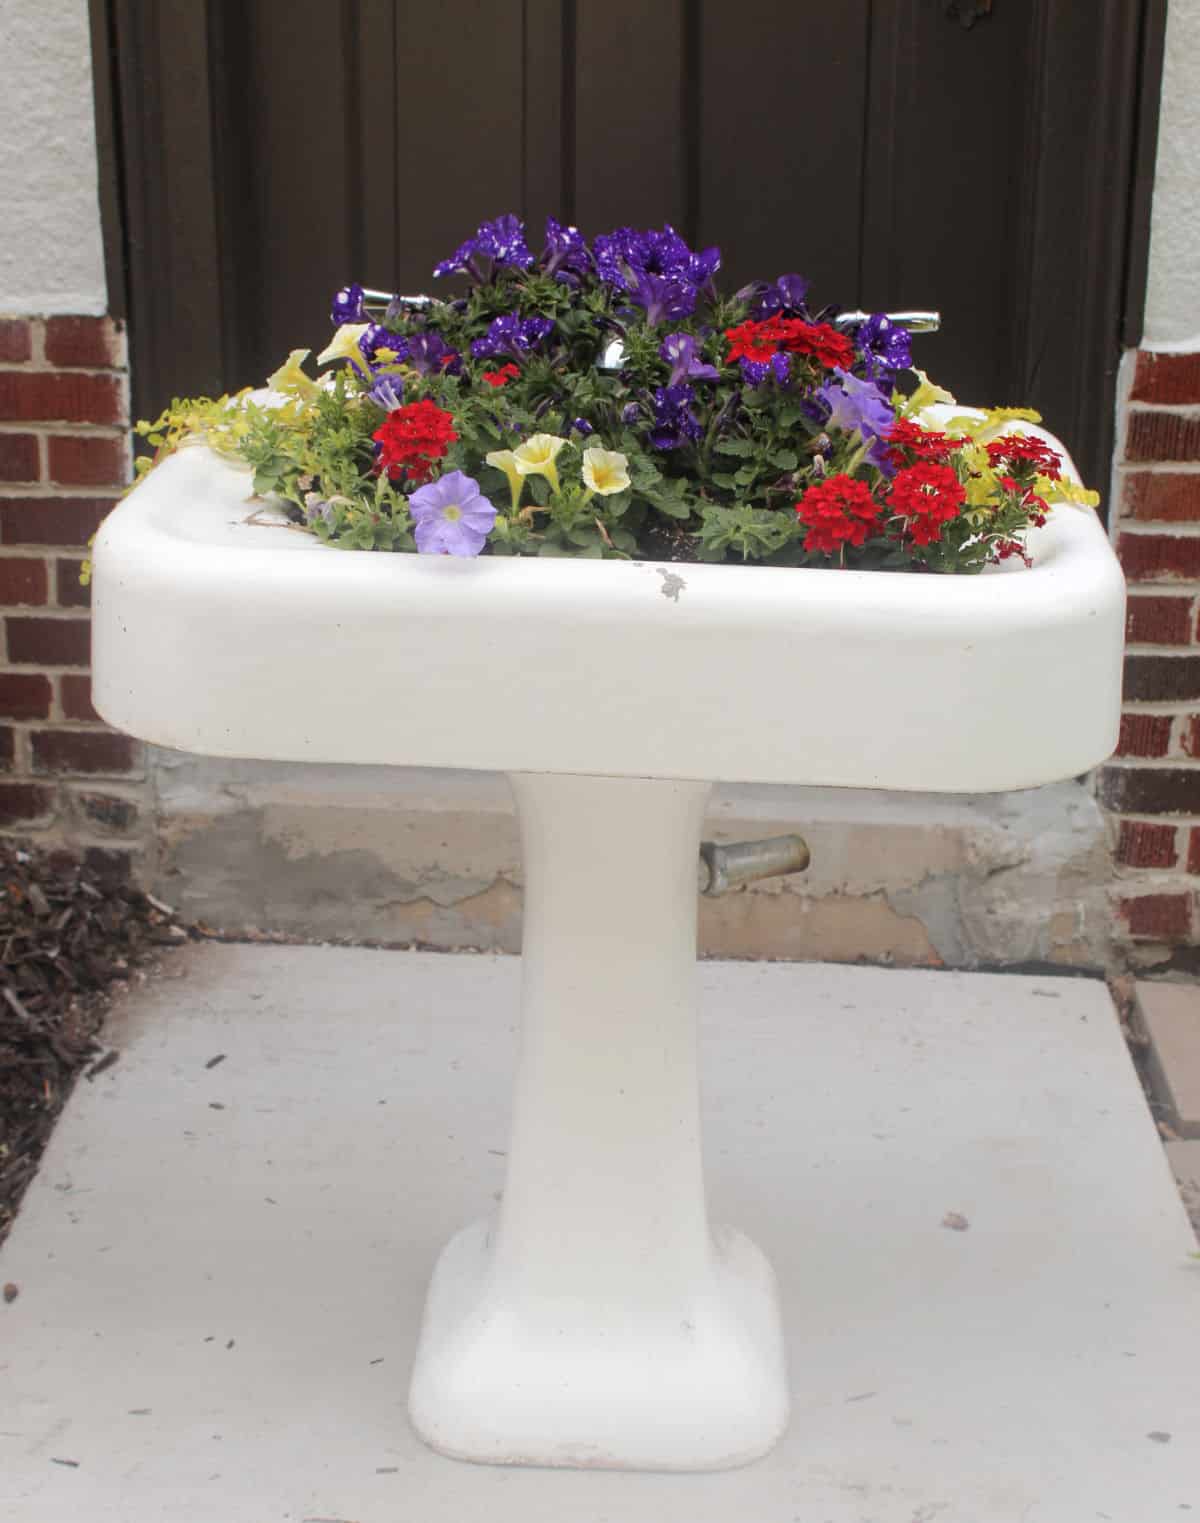 Antique white sink holding colorful flowering plants.